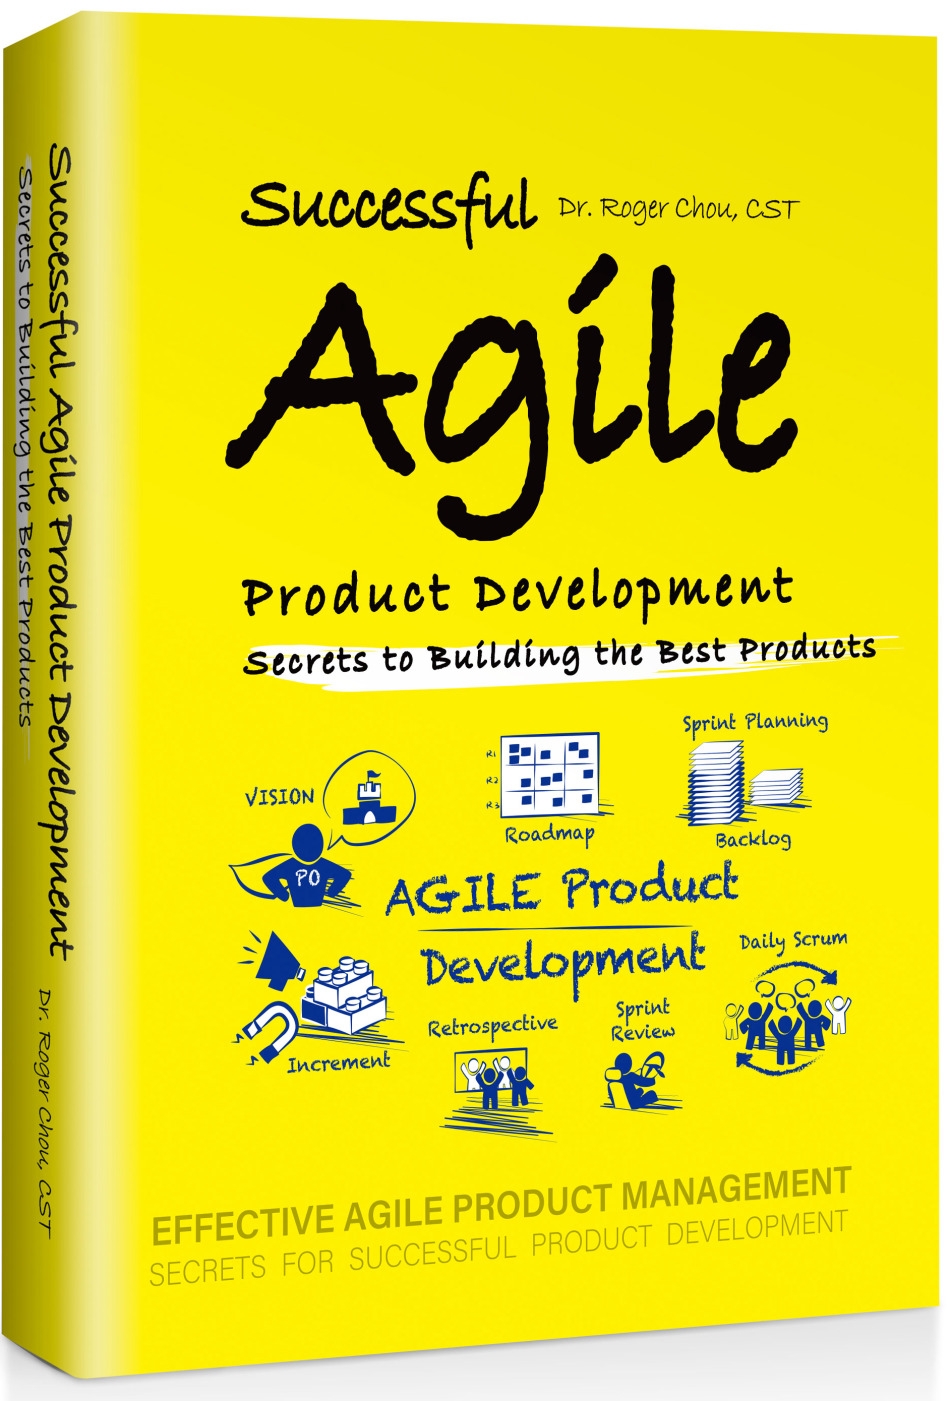 Successful Agile Product Development: Secrets to Building the Best Products